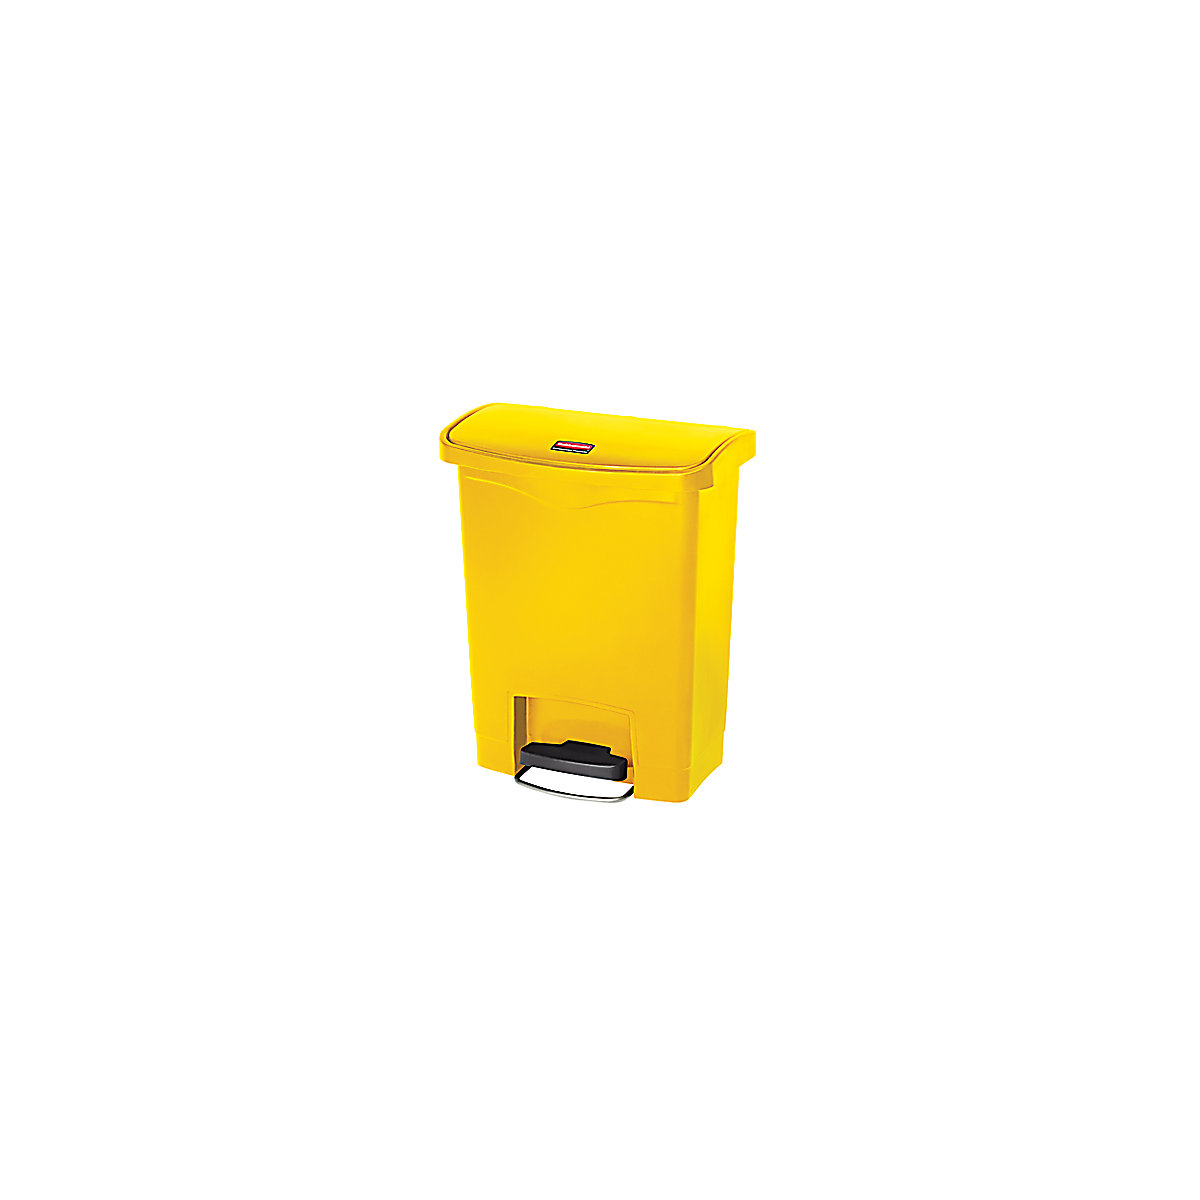 SLIM JIM® waste collector with pedal – Rubbermaid, capacity 30 l, WxHxD 271 x 536 x 425 mm, yellow-4